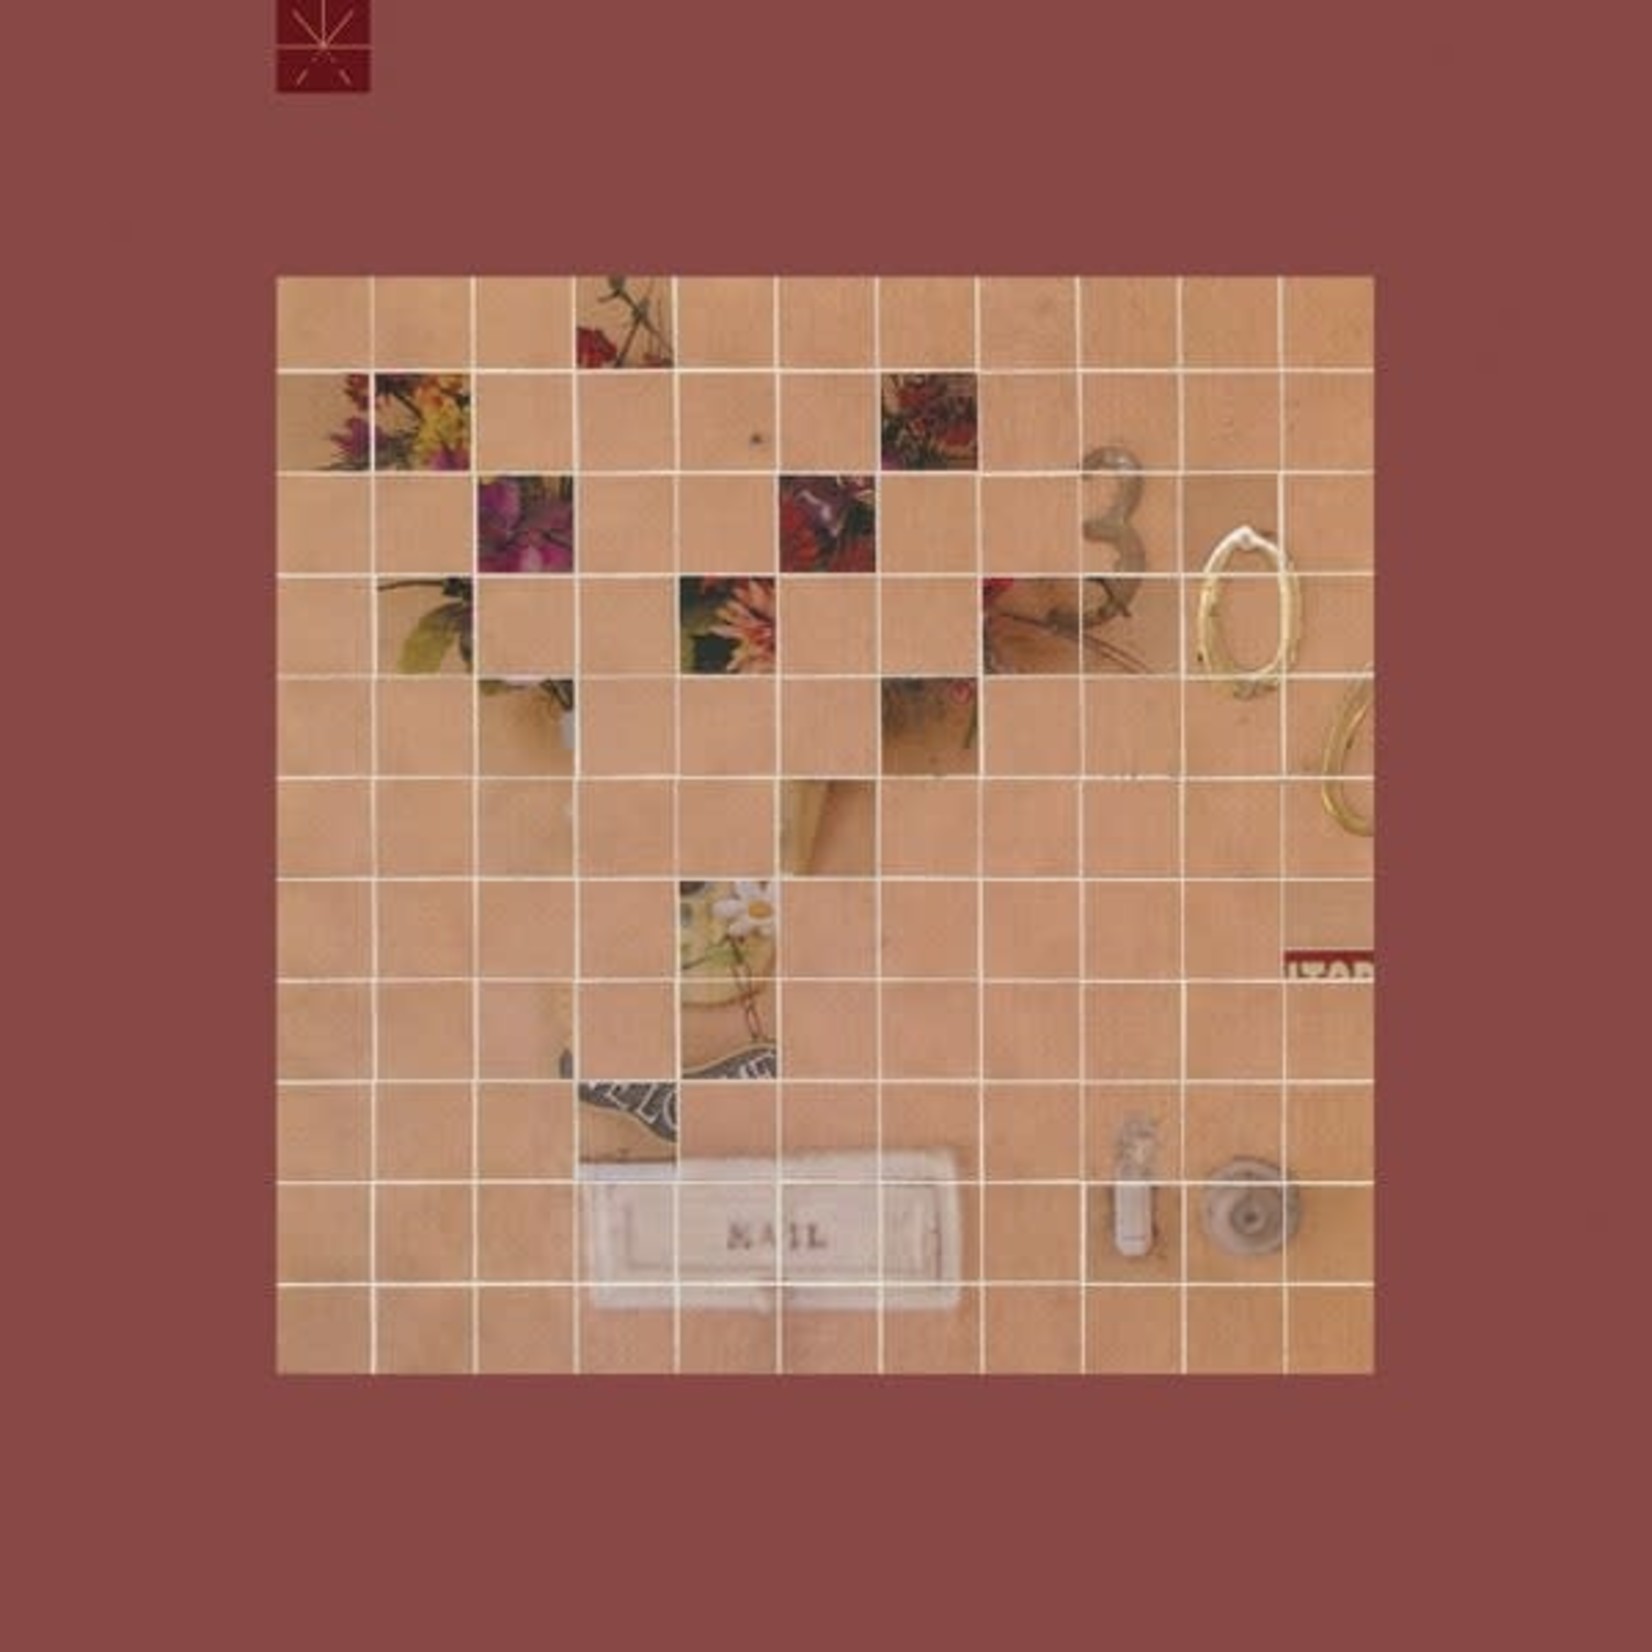 [New] Touche Amore - Stage Four